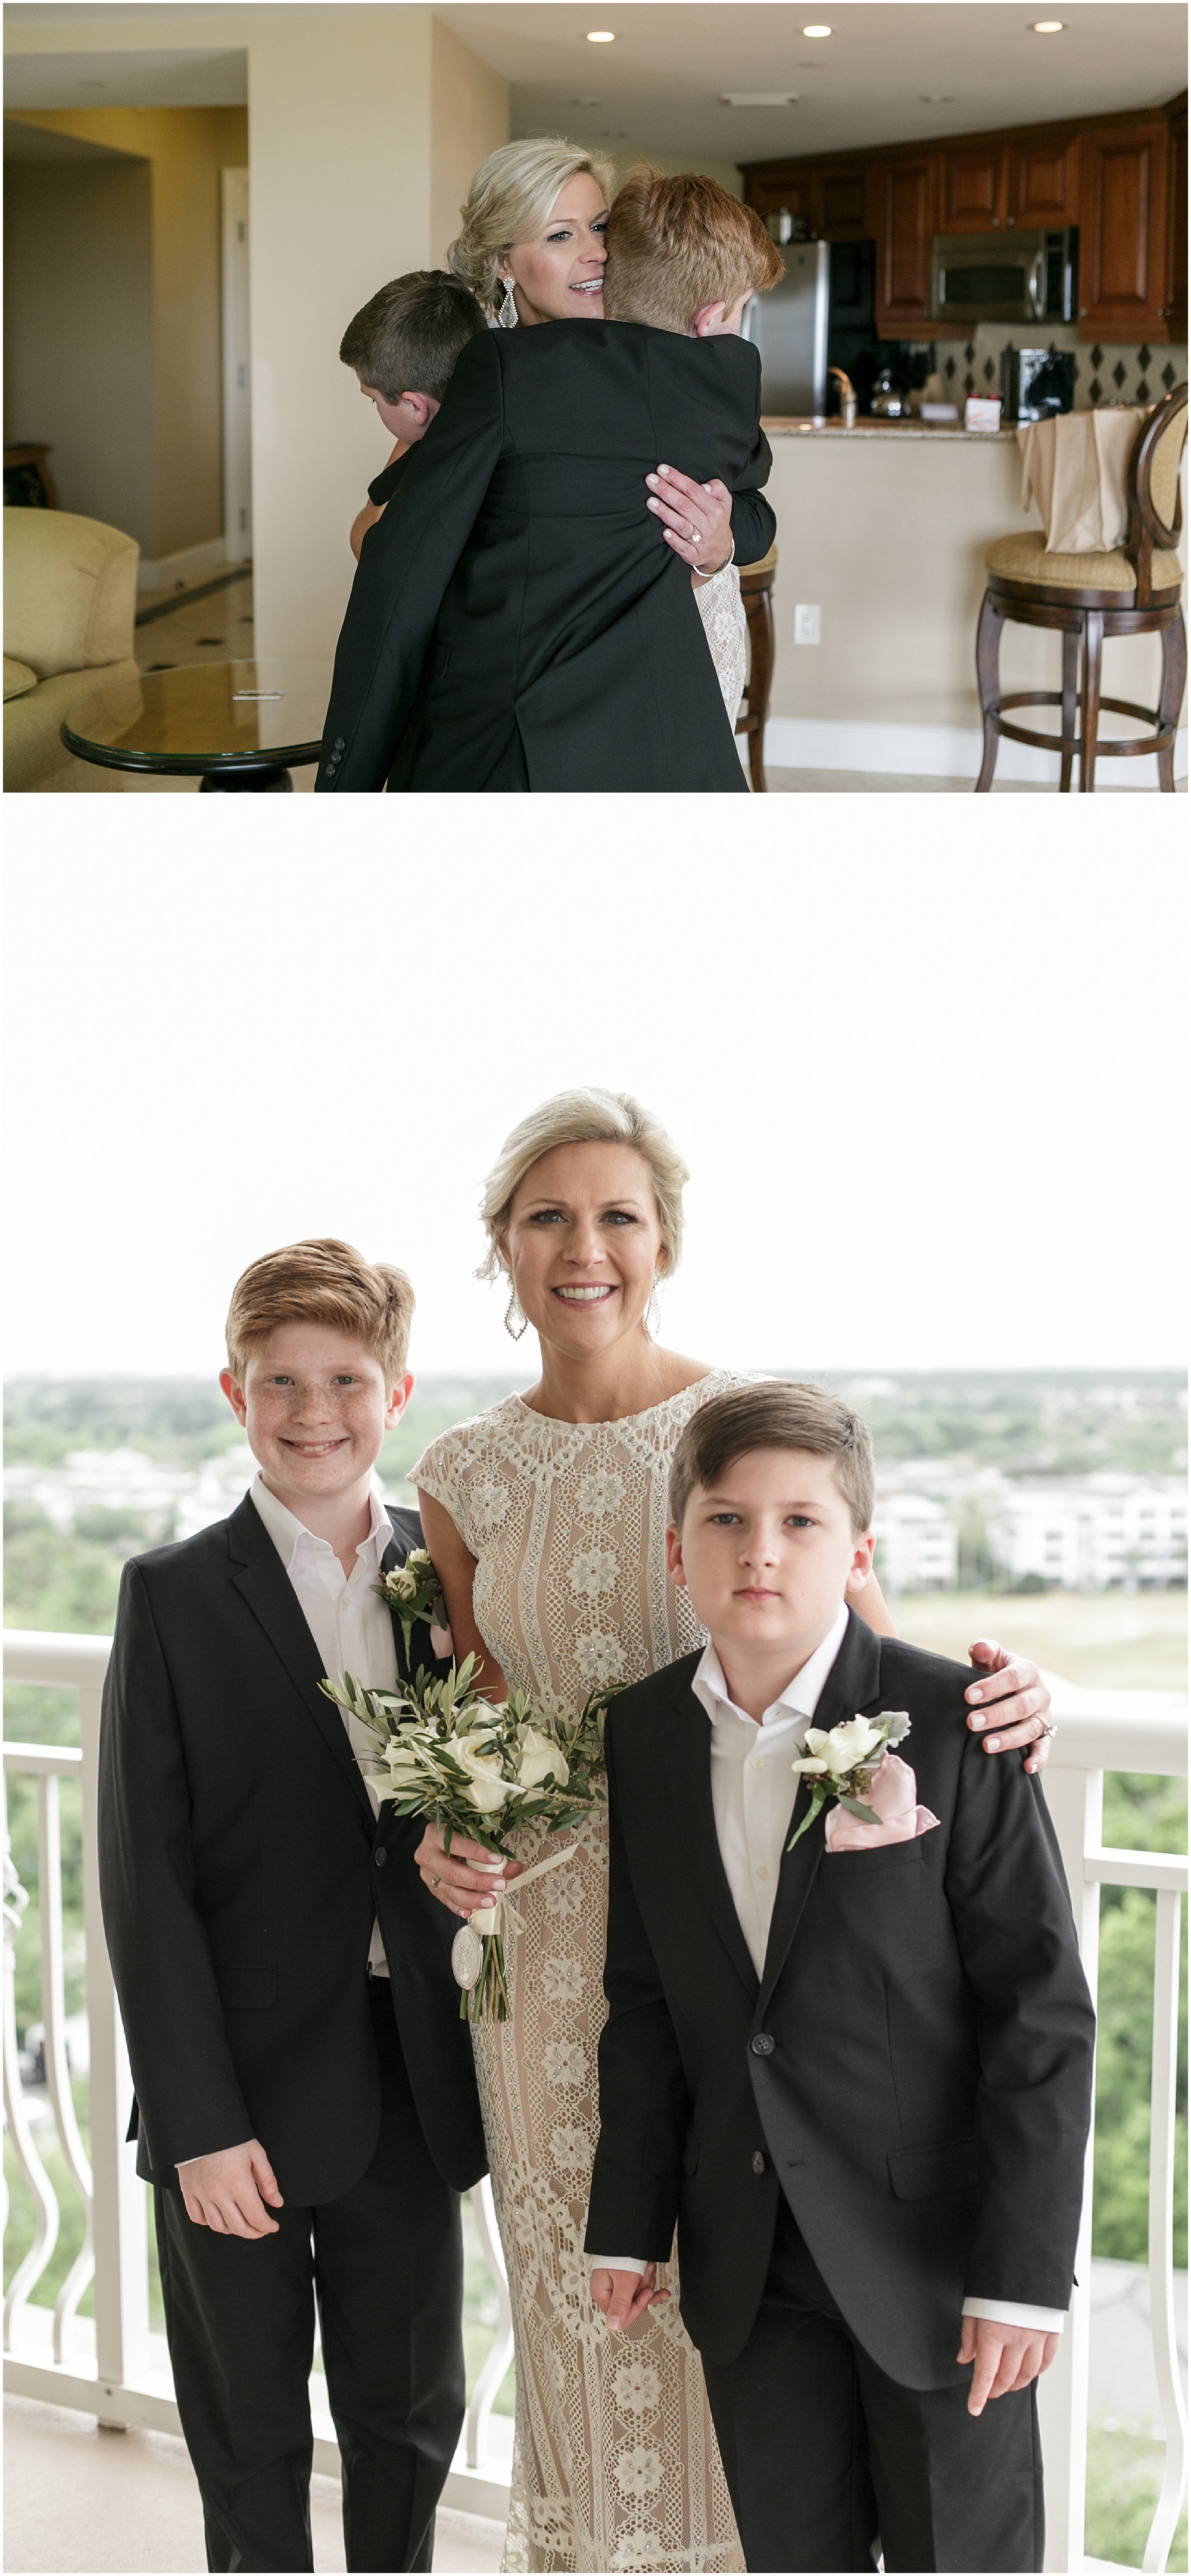 Mom giving her sons a hug and taking photos with them on the balcony.